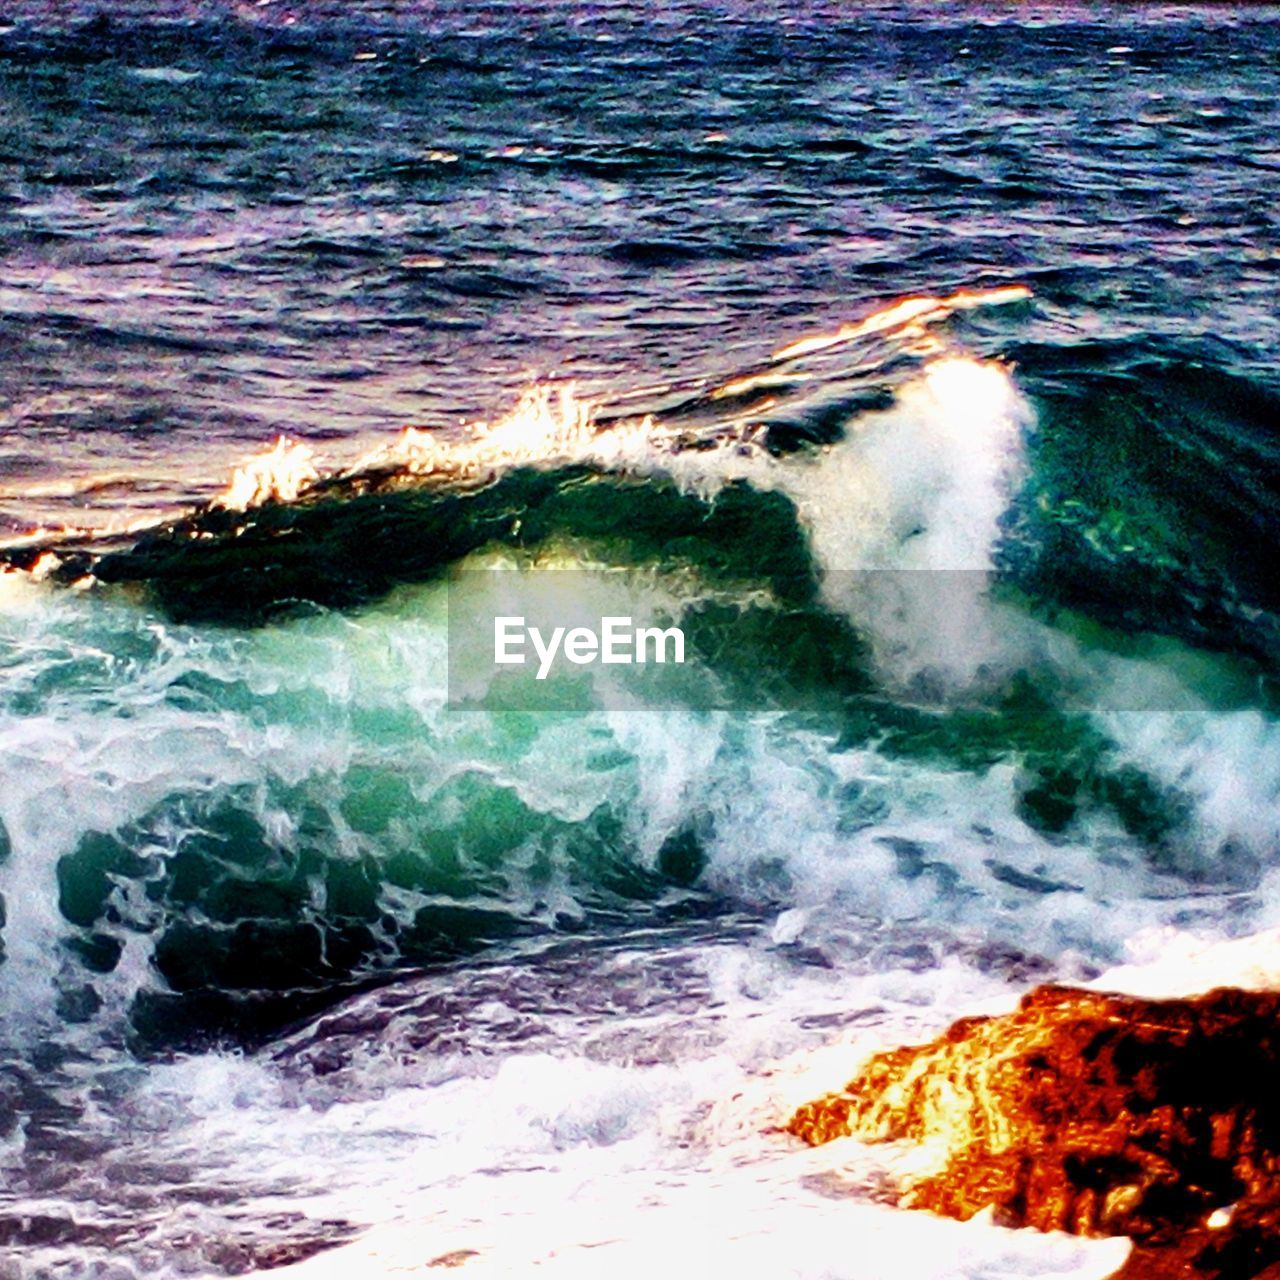 SCENIC VIEW OF SEA WAVES